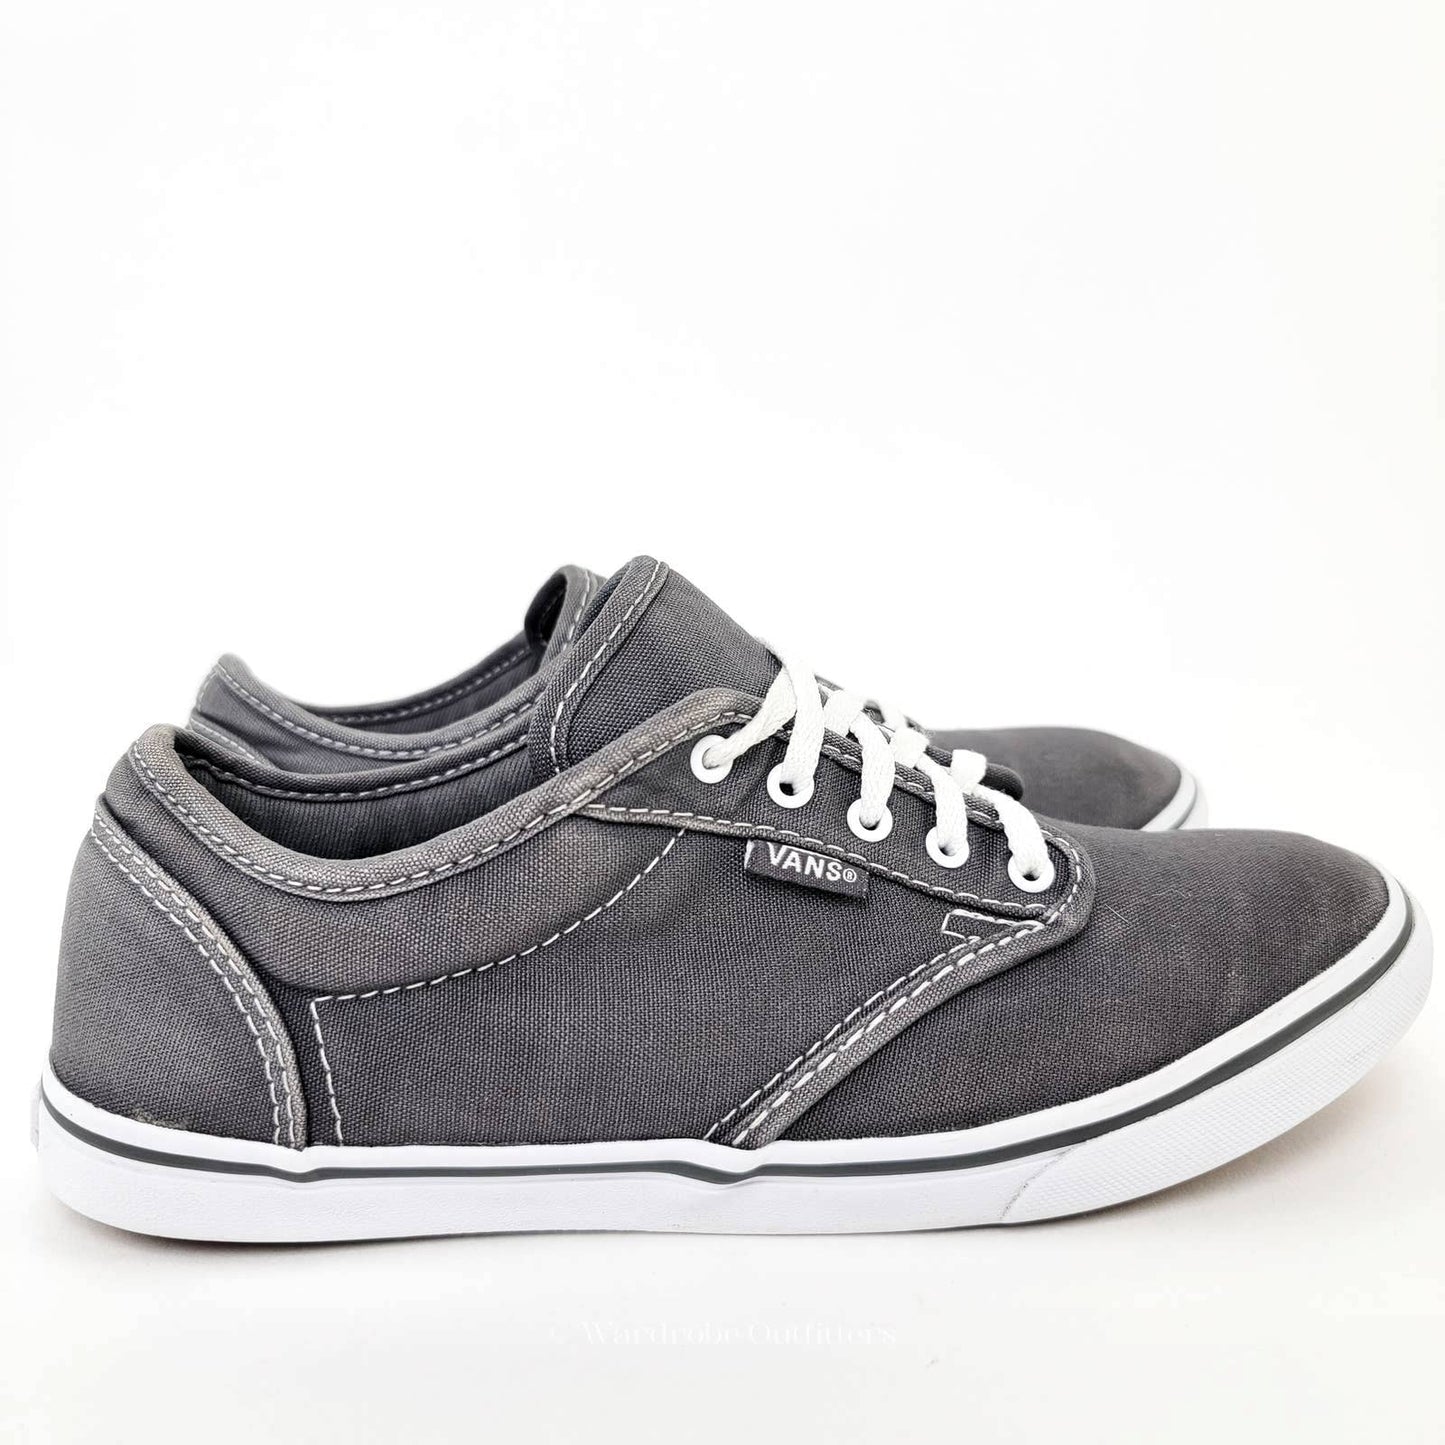 Vans Atwood Classic Lace Up Low Top Sneakers - 7